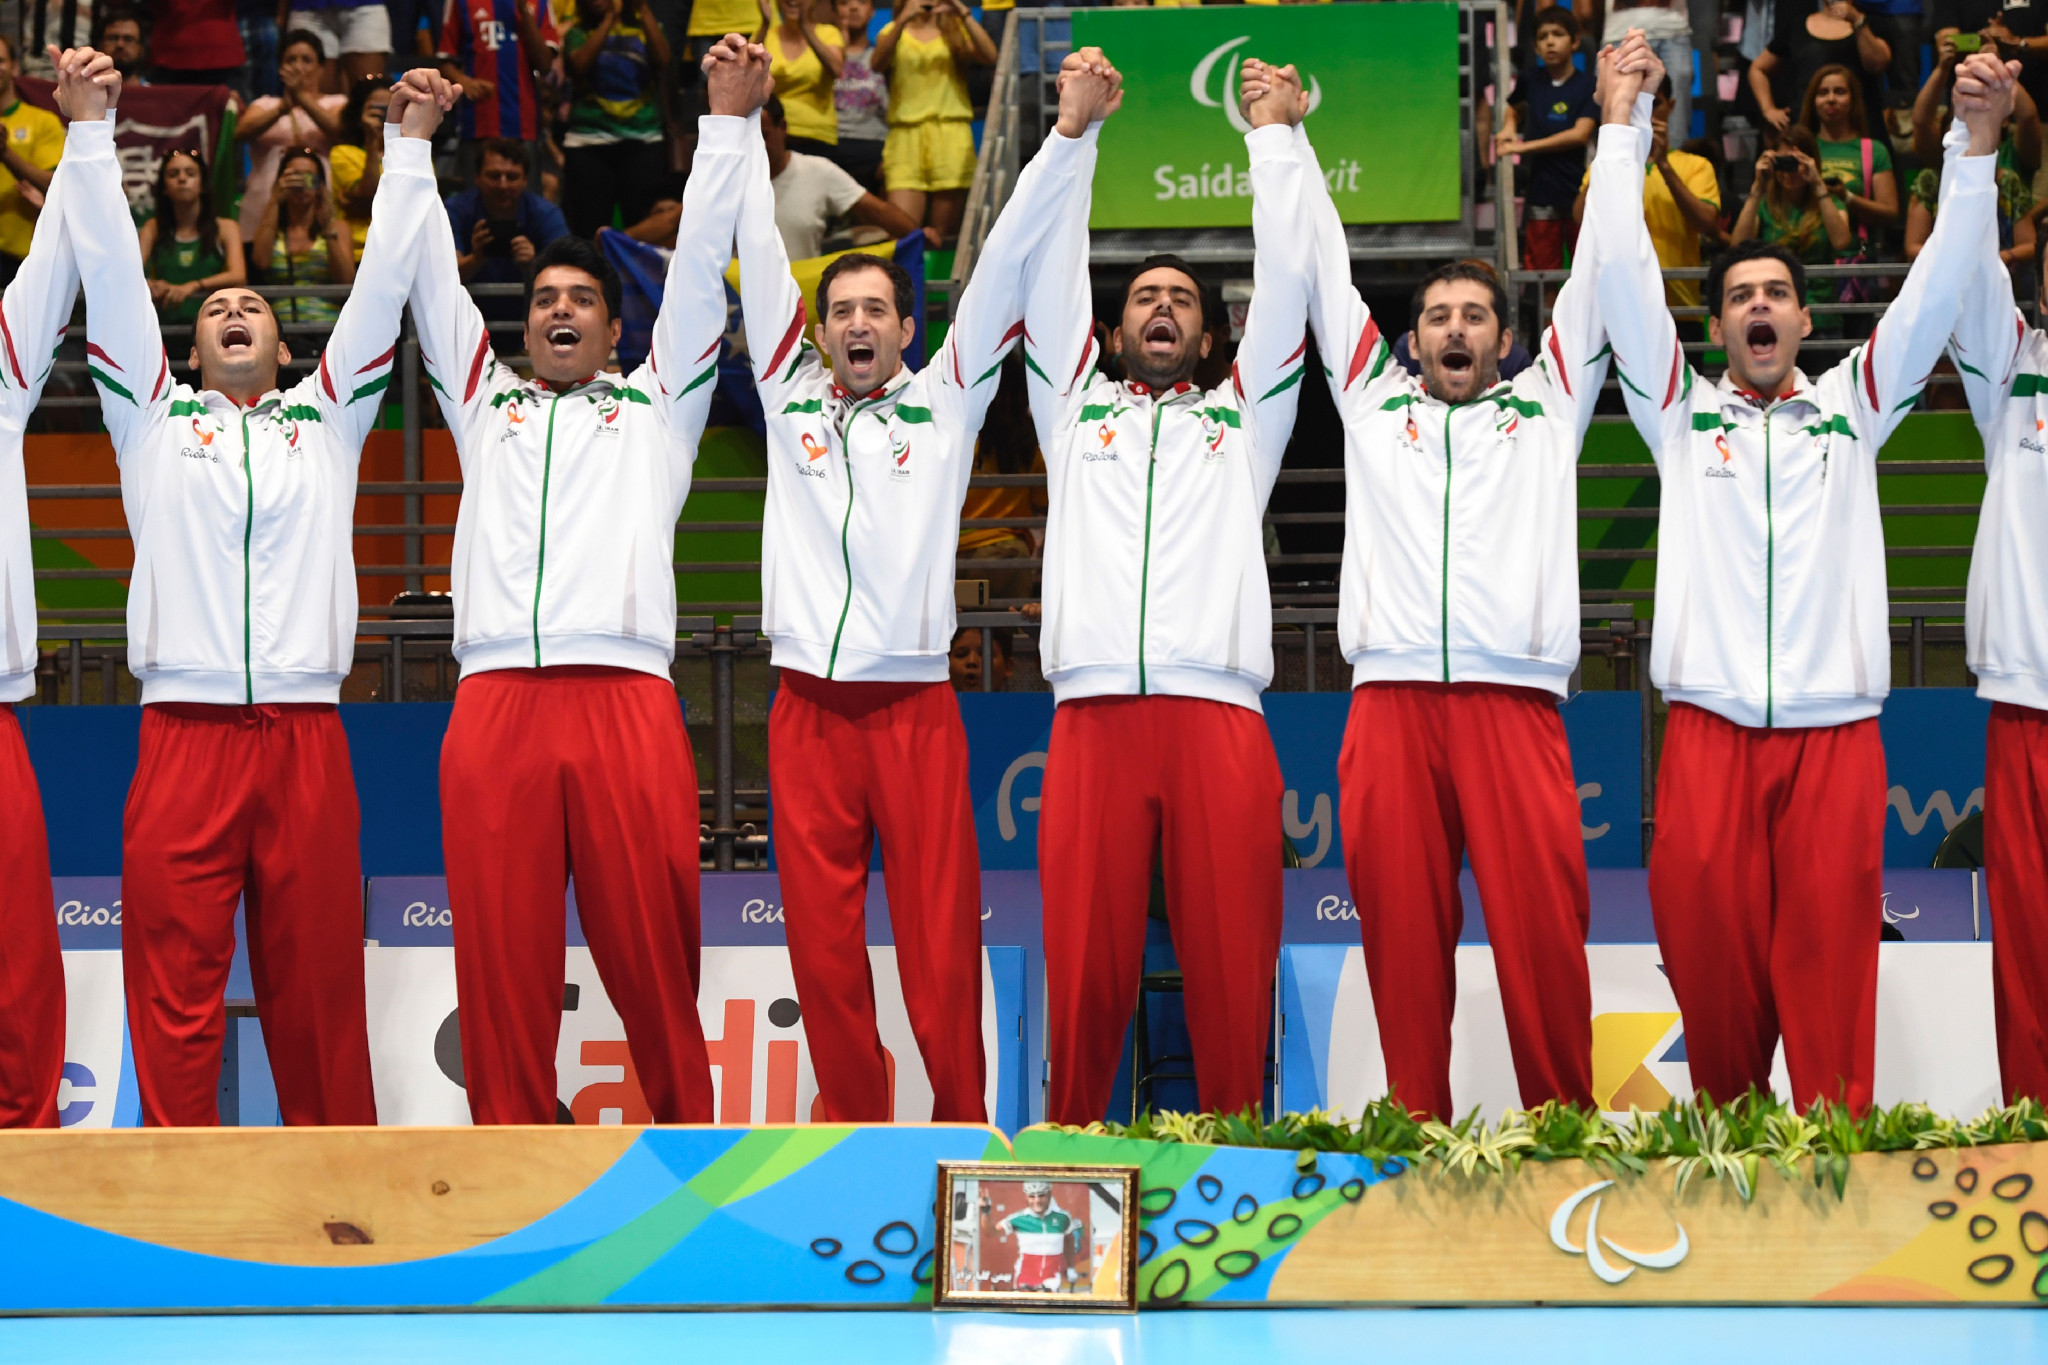 Iran are the reigning men's Paralympic sitting volleyball champions